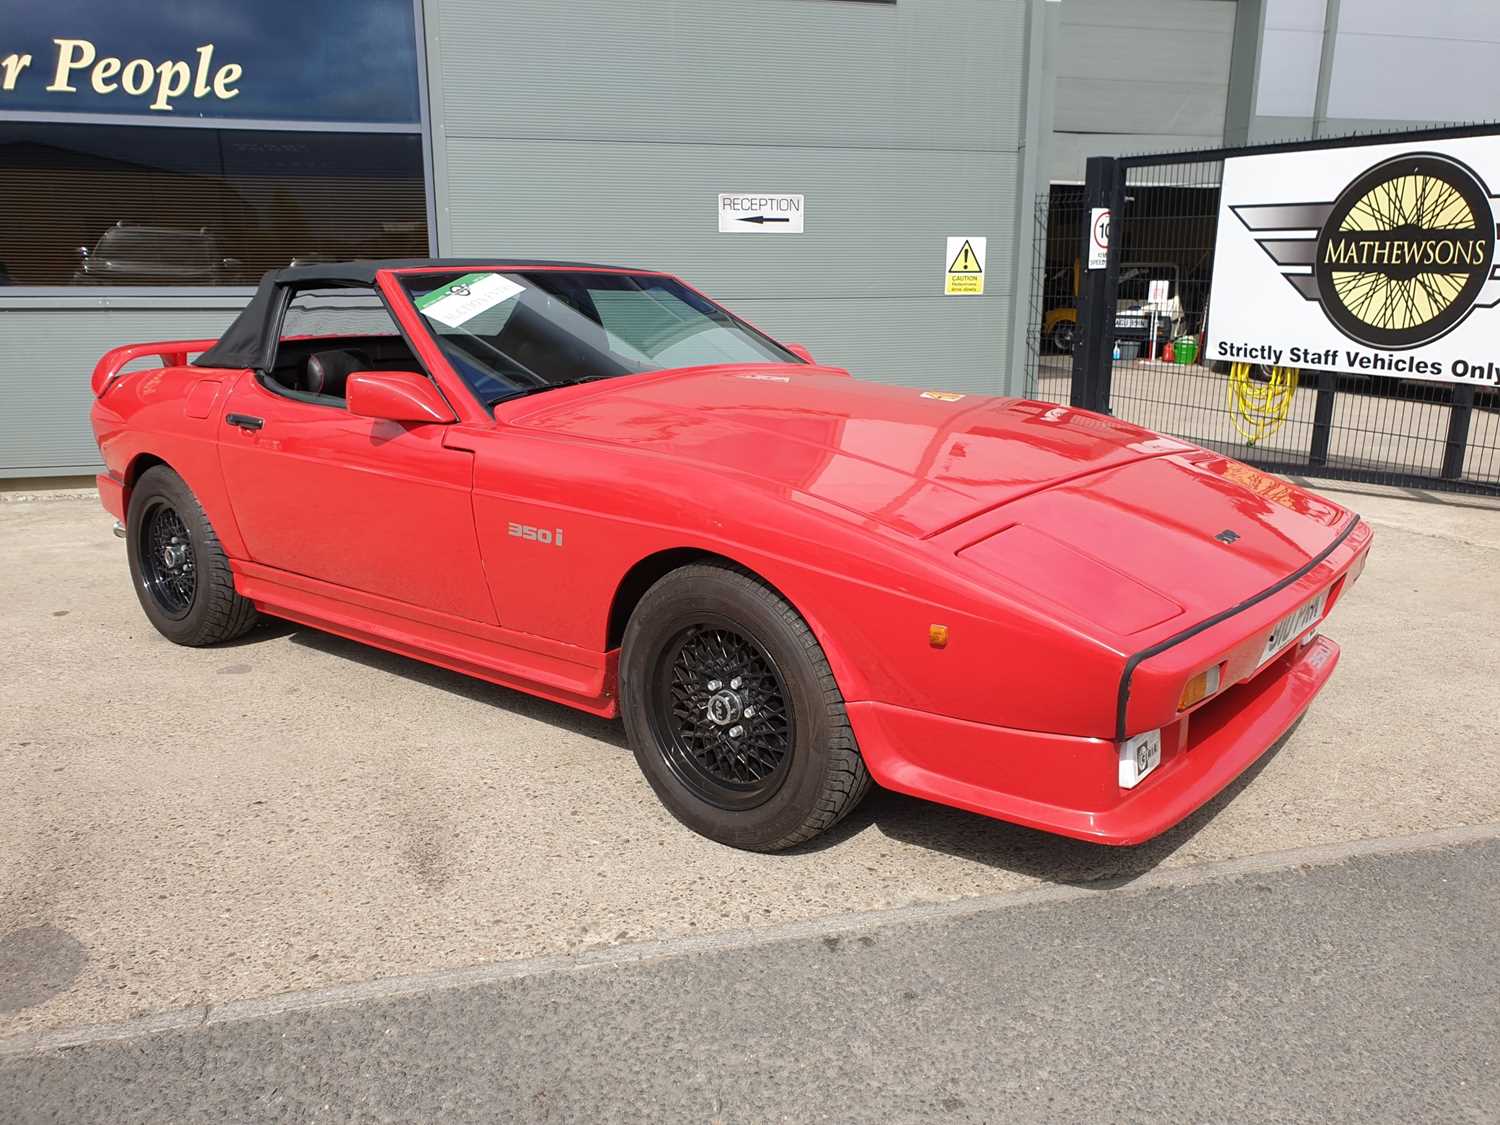 Lot 347 - 1989 TVR 350I